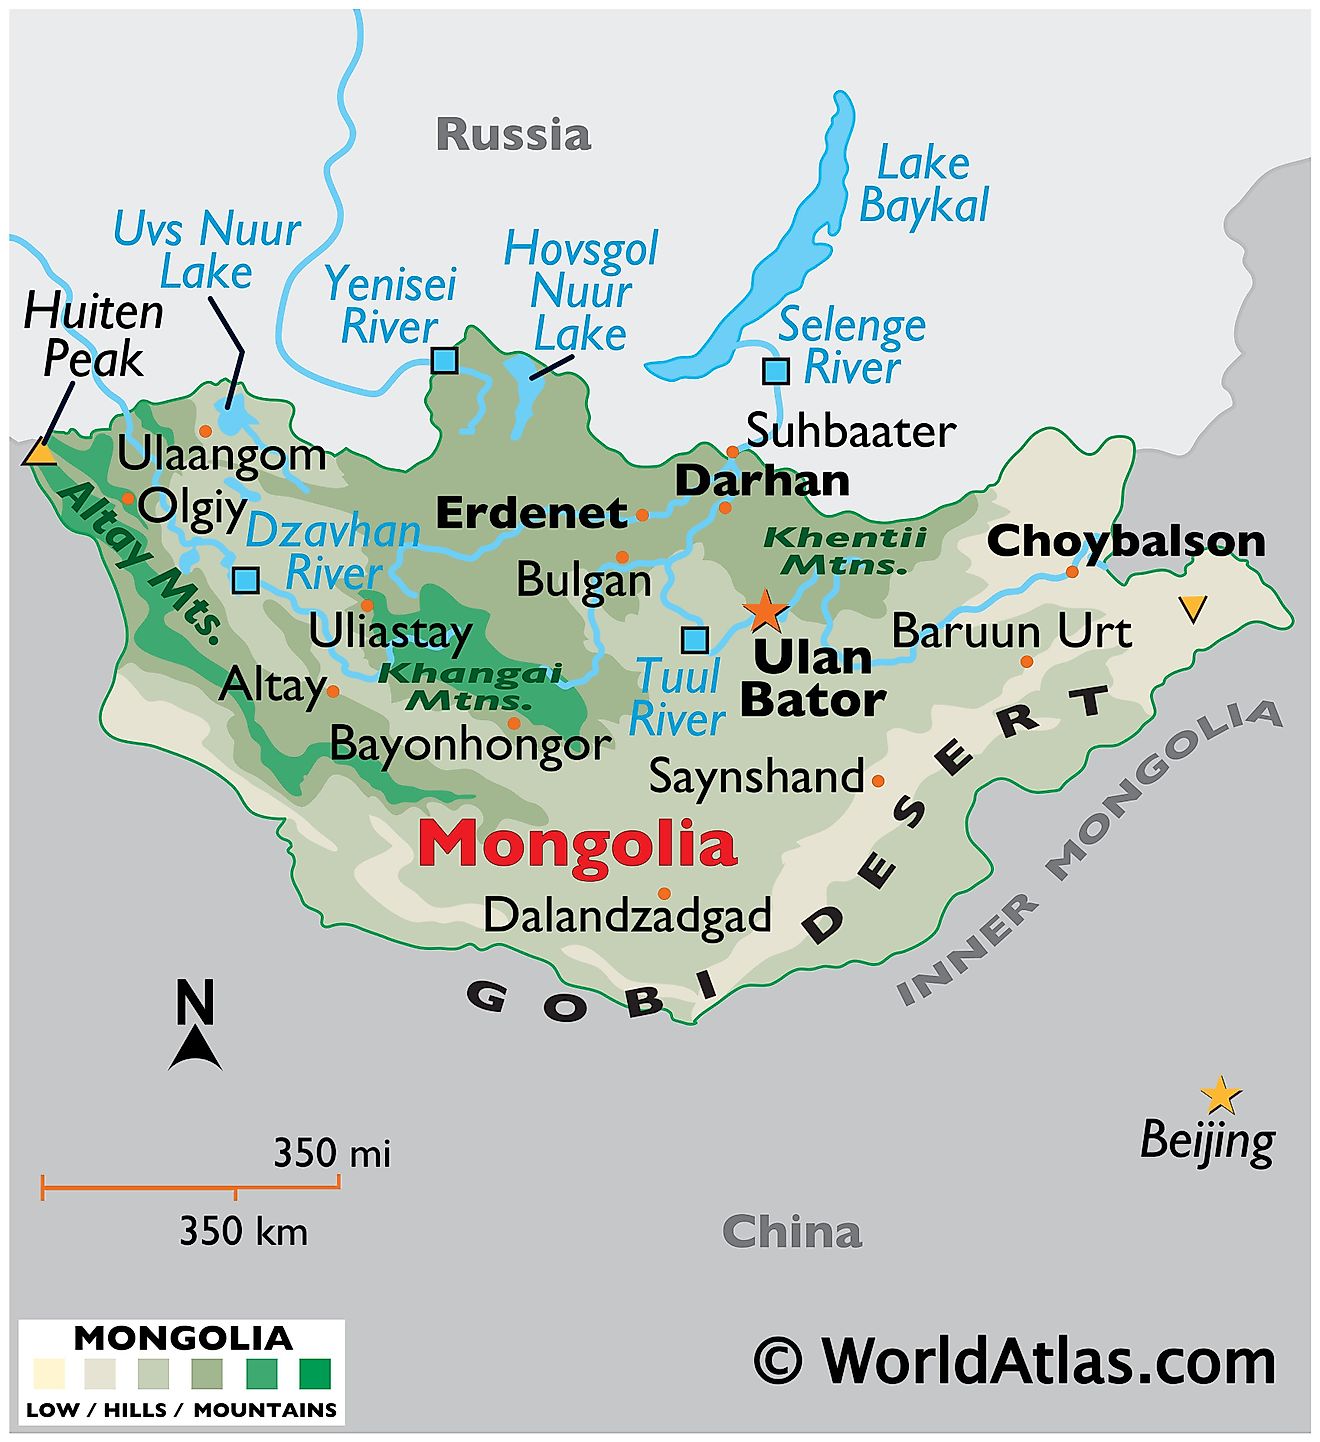 Physical Map of Mongolia showing international boundaries, relief, highest and lowest points, important cities, major mountain ranges, important rivers, the Gobi Desert, etc.